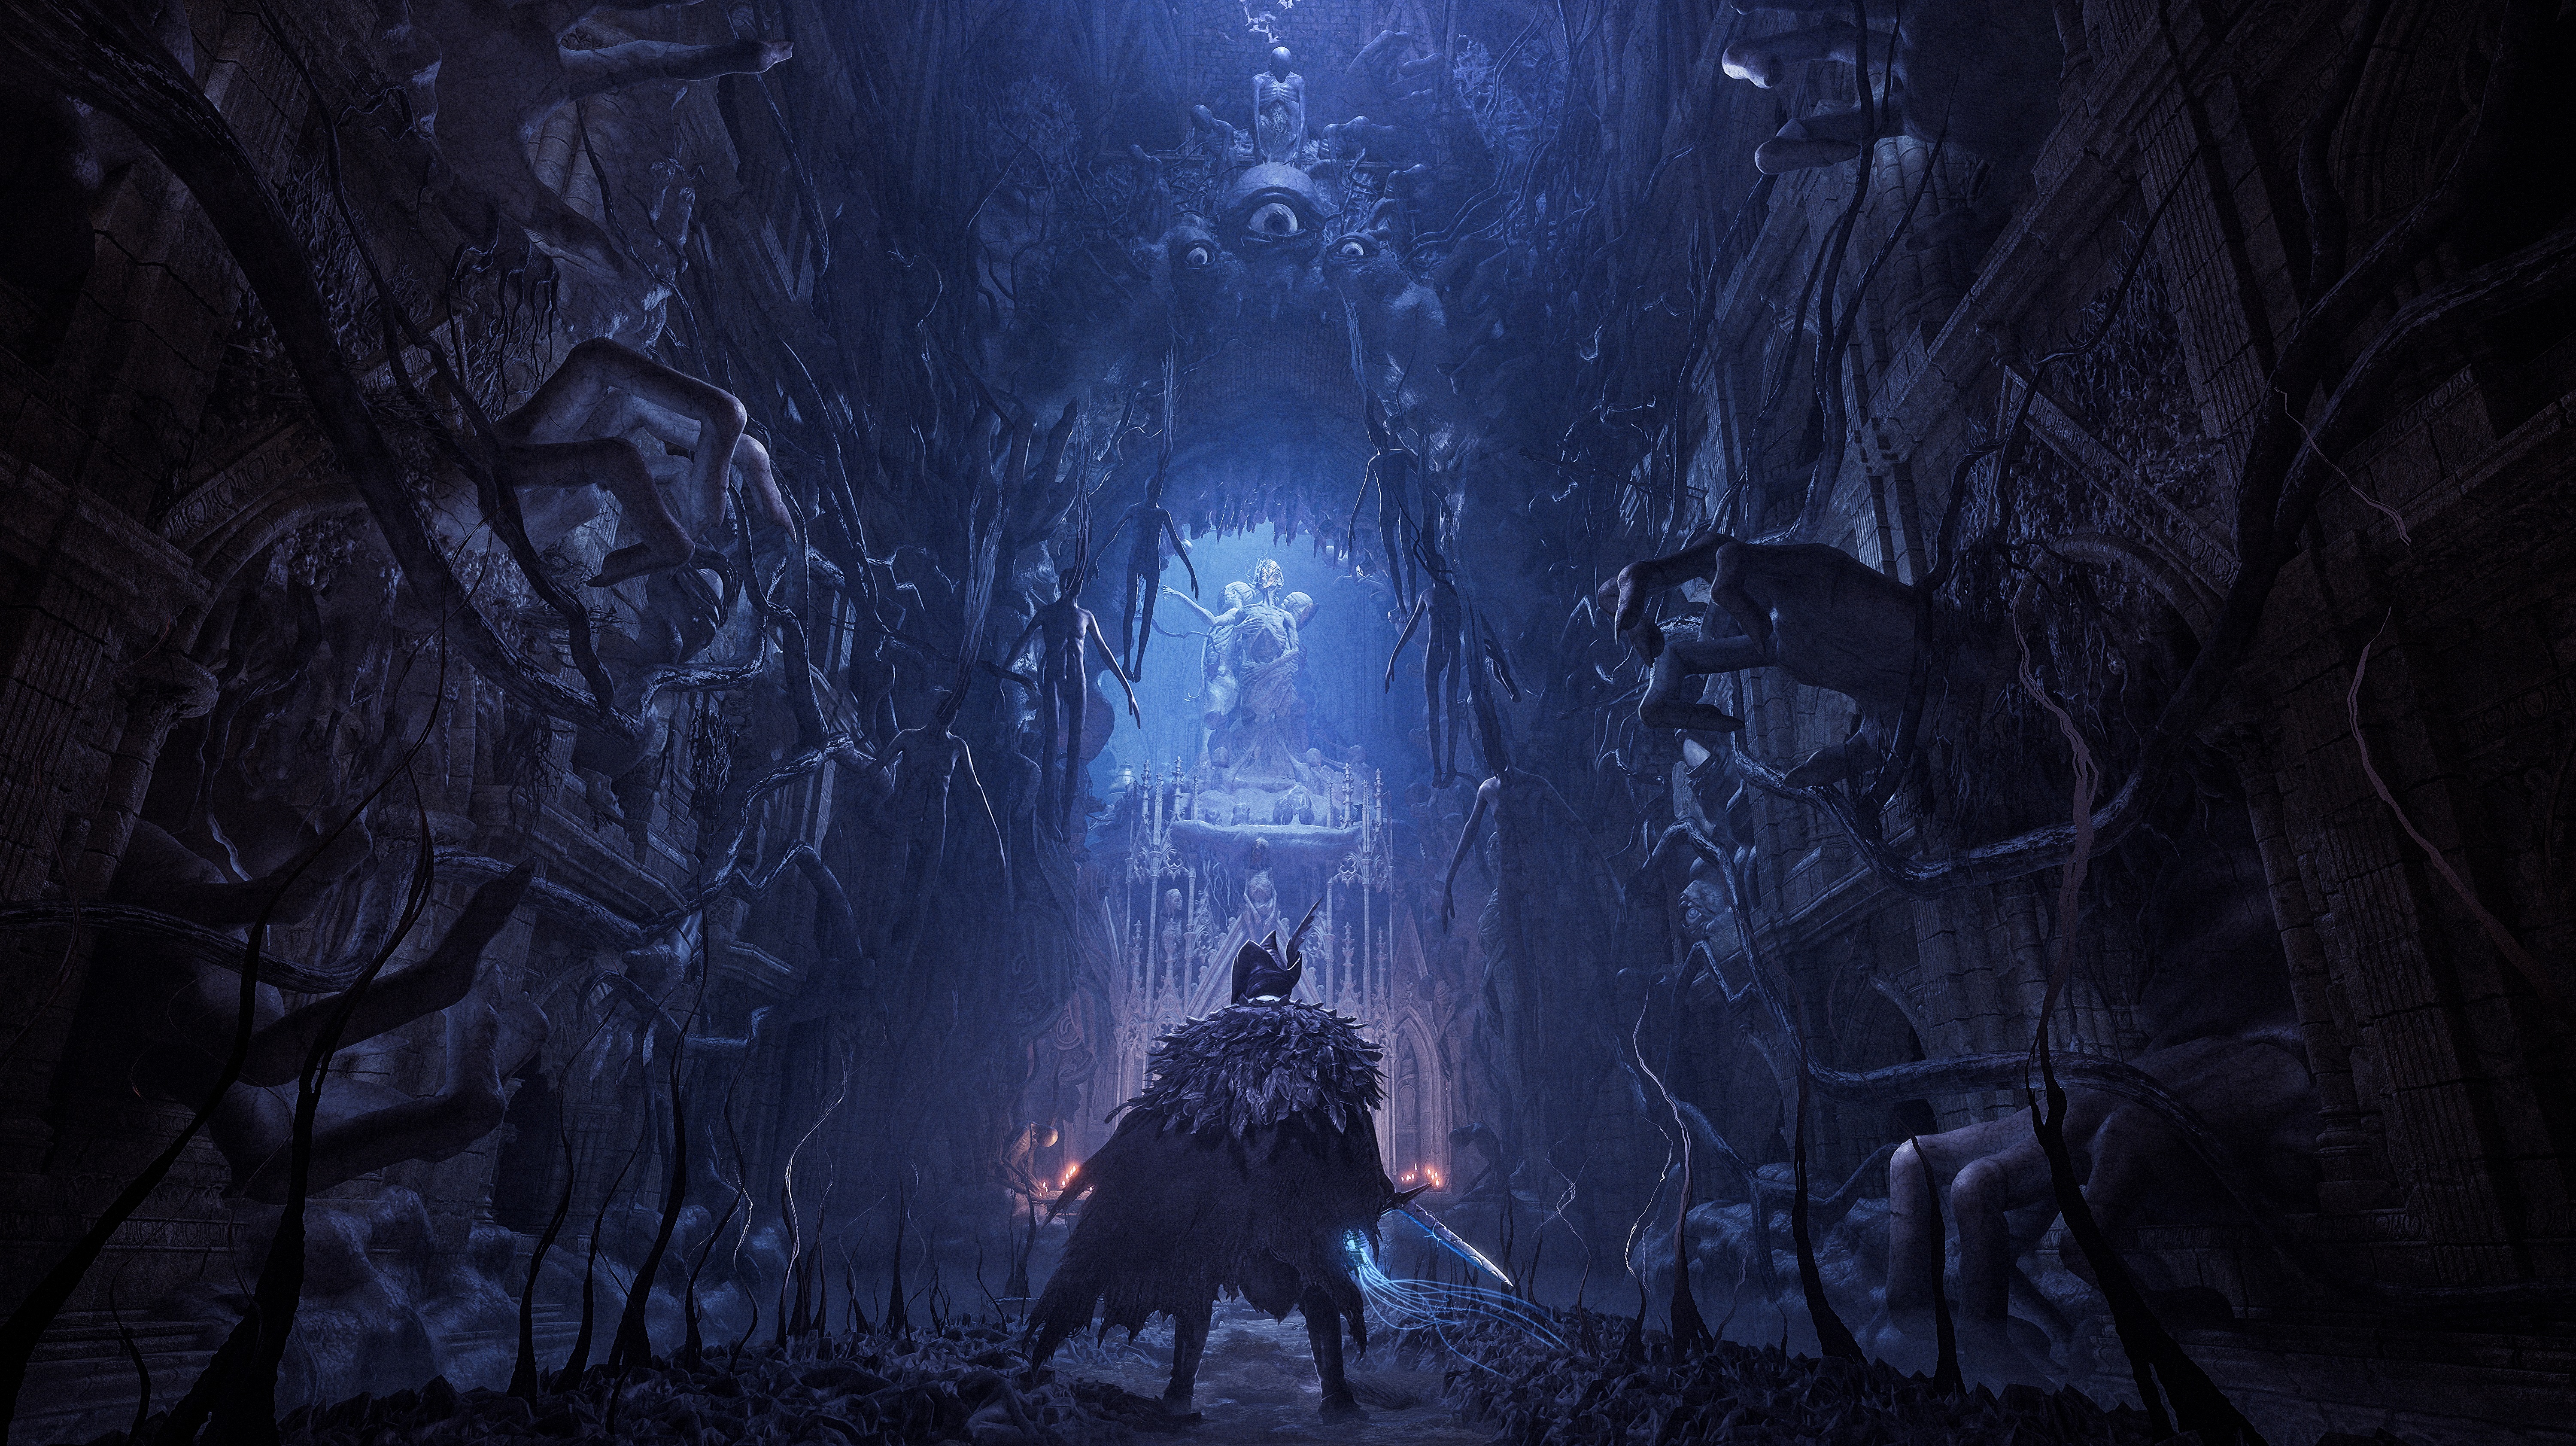 Lords of the Fallen (2023) PC Review – Better in every way